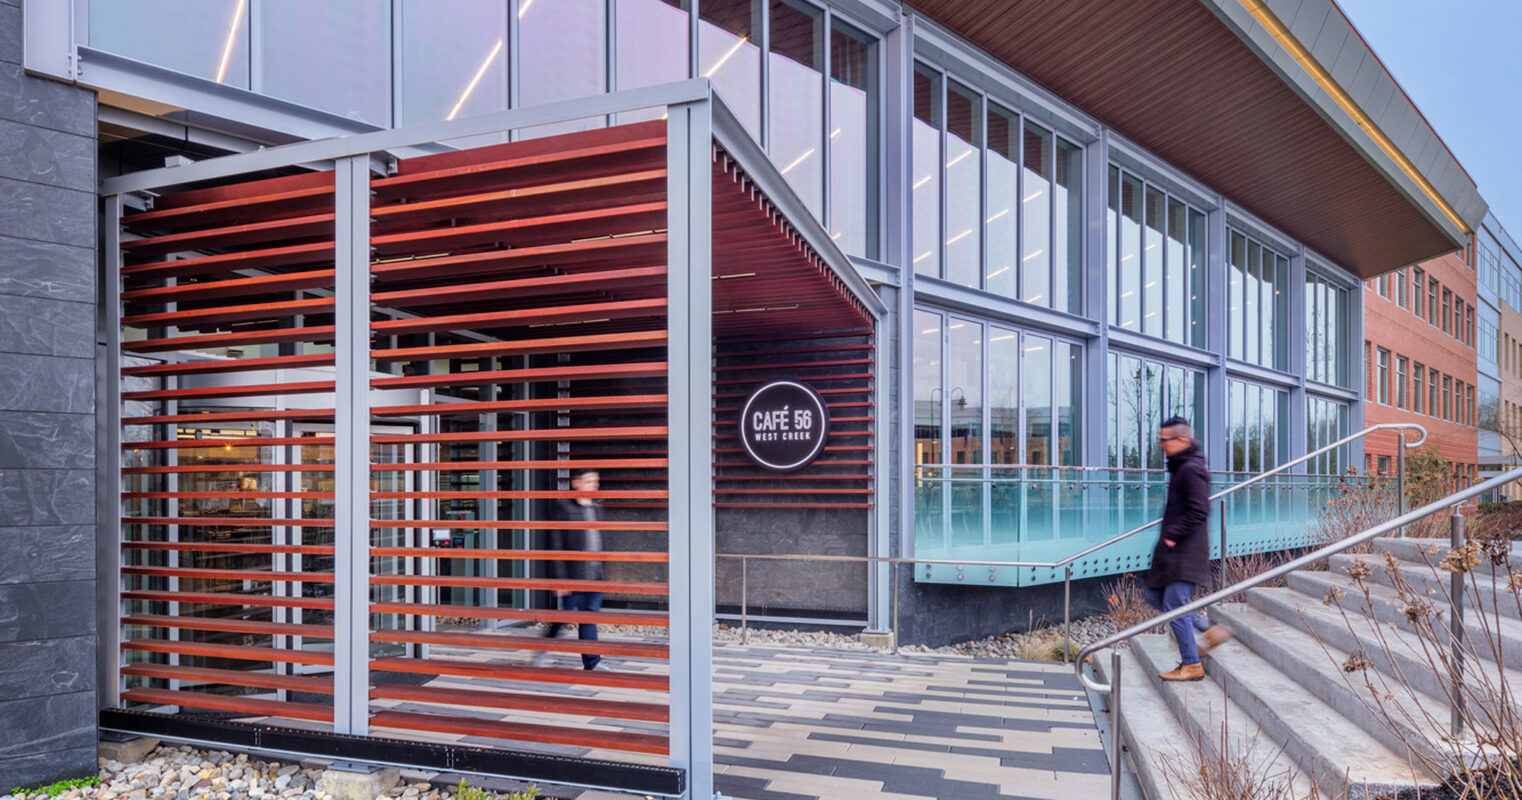 Modern cafe exterior featuring a combination of stone, wood, and metal materials with slatted wooden screens, large glass windows, and a prominent overhanging roof with geometric details, set against a landscaped entrance with concrete steps.